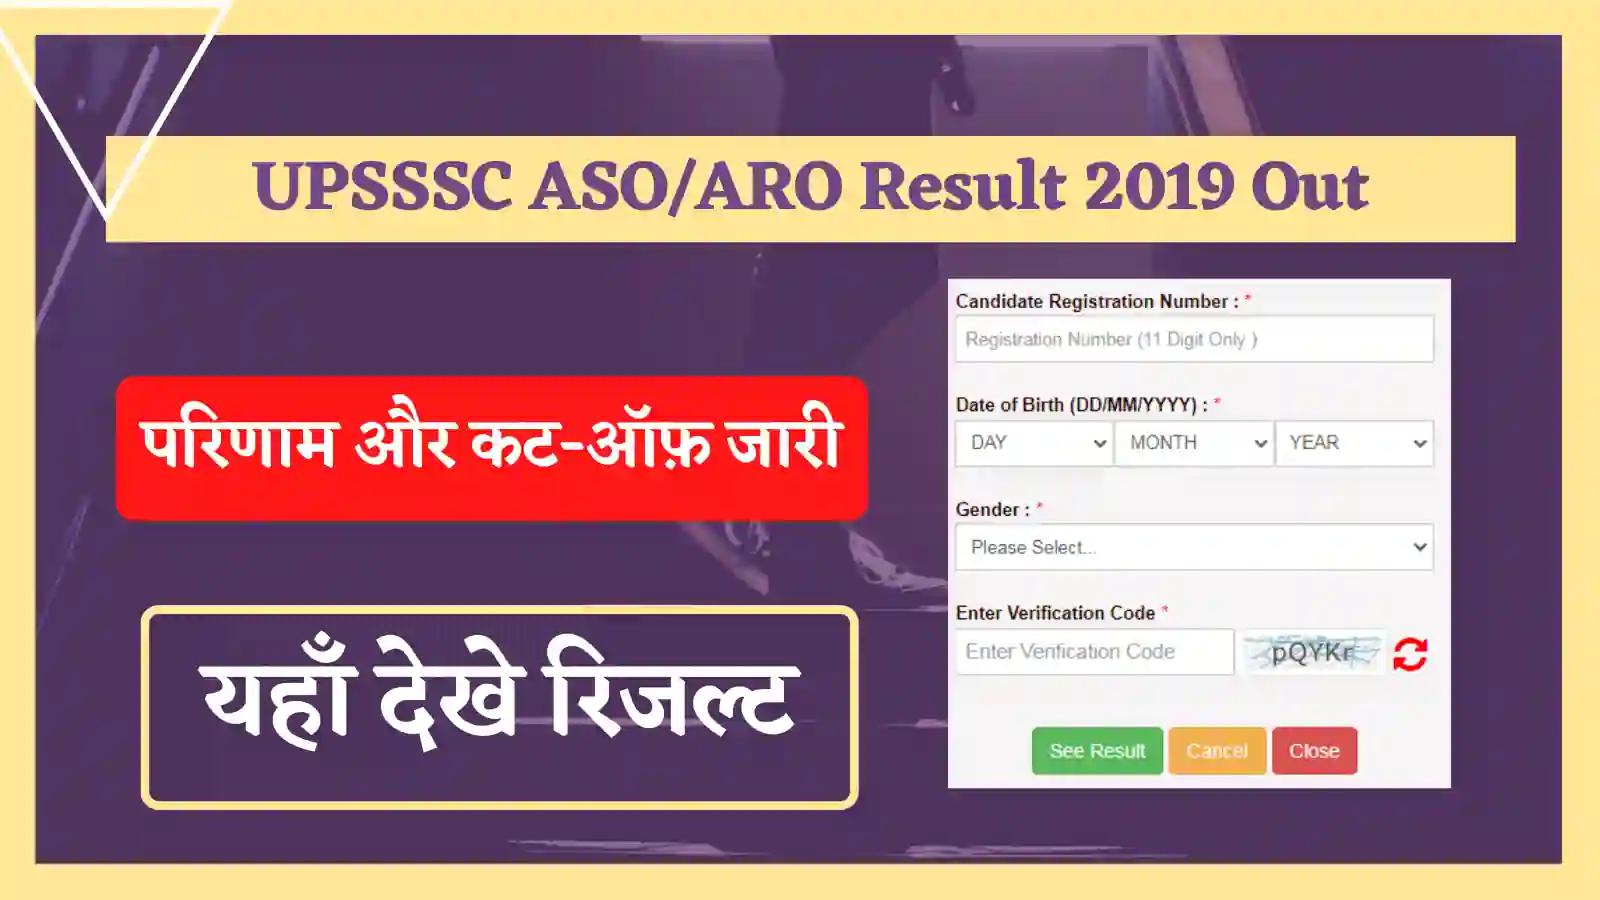 UPSSSC ASO/ARO Result 2019 Out